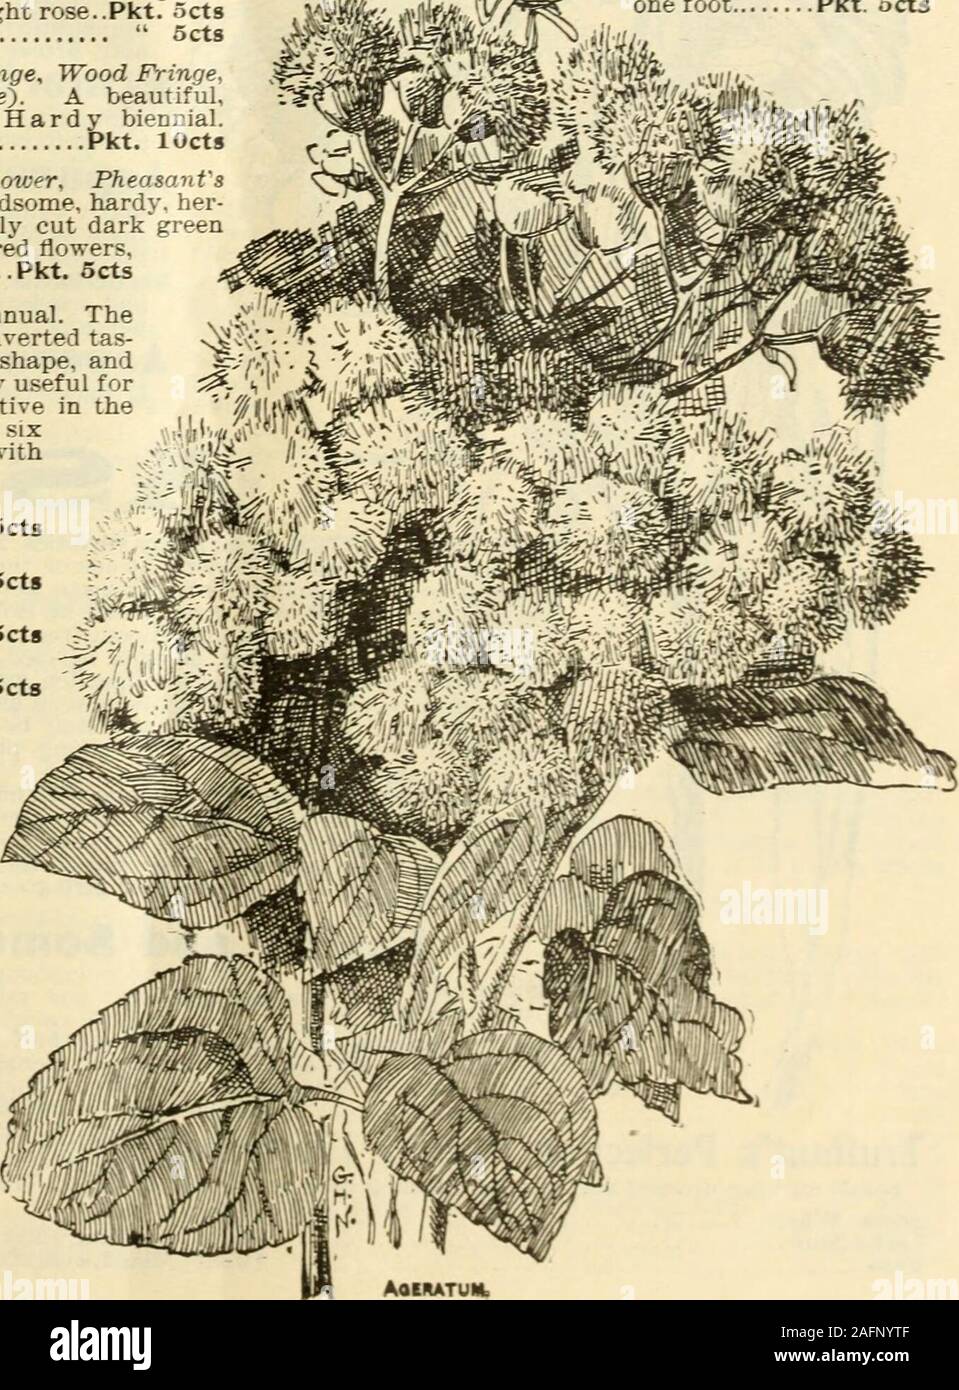 . Seed annual 1903. AQERATl1 crimson; perennial... .Pkt. 5ctsrose, white center; AOROSTIS NEBllOSA (Ornament-al Grass).An ornamental grass in which the smallseeds are so gracefully poised in large,open clusters as to have the effect of acloud, and when dried can be effectivelyused in dried bouquets. Grows easily inany common garden soil. Hardv anniaal;about one and a half feet high. .Pkt. 5ctg 5ct8 5ct8 5cts 68 D. M. FERRY & CO., DETROIT, MICH Stock Photo